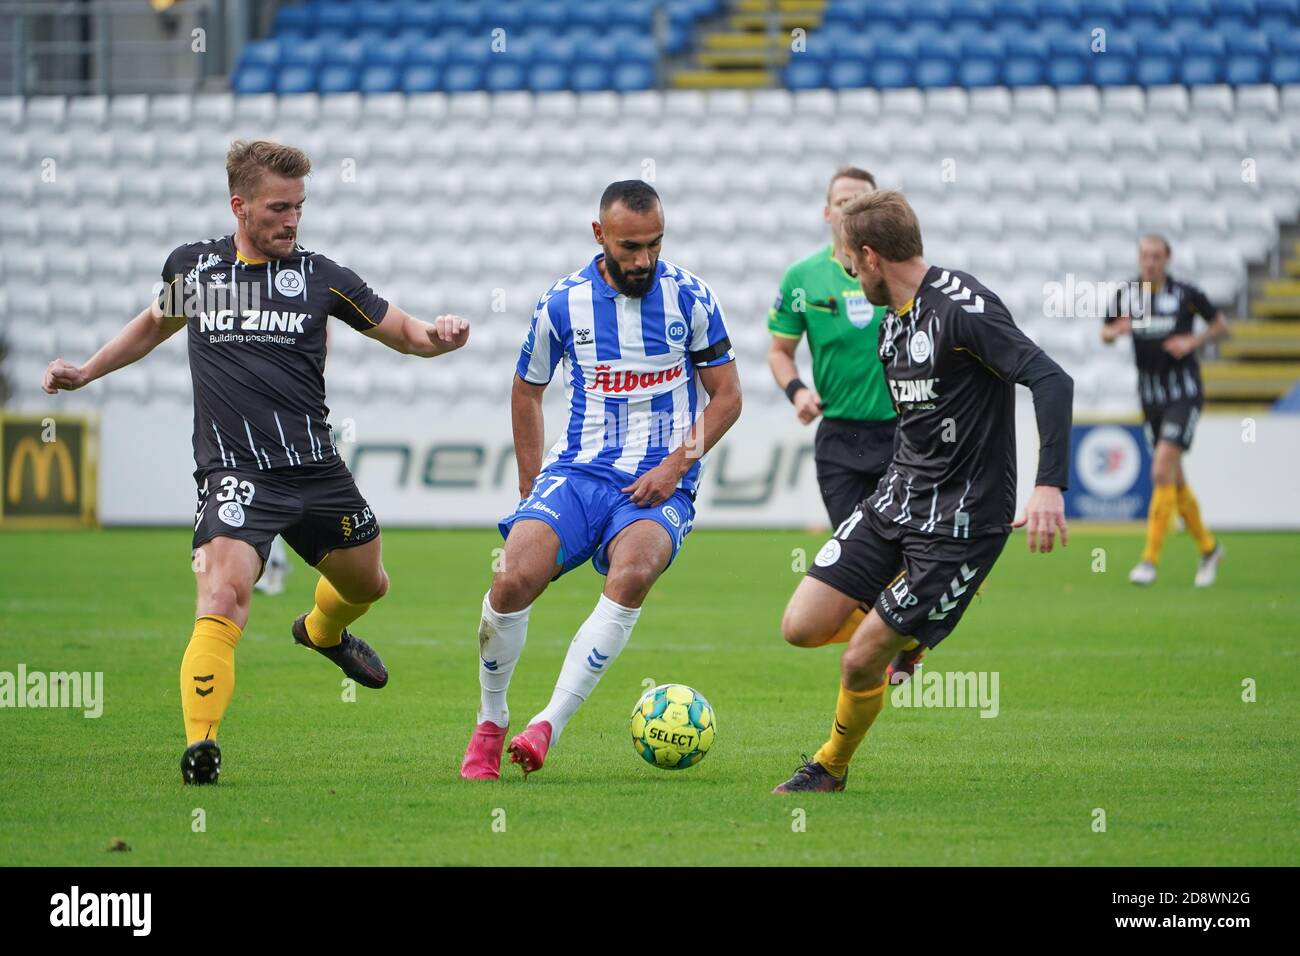 Odense, Denmark. 01st Nov, 2020. Issam (7) of OB seen during 3F Superliga match between Odense Boldklub and AC Horsens at Nature Energy Park in Odense. (Photo Credit: Gonzales Photo/Alamy